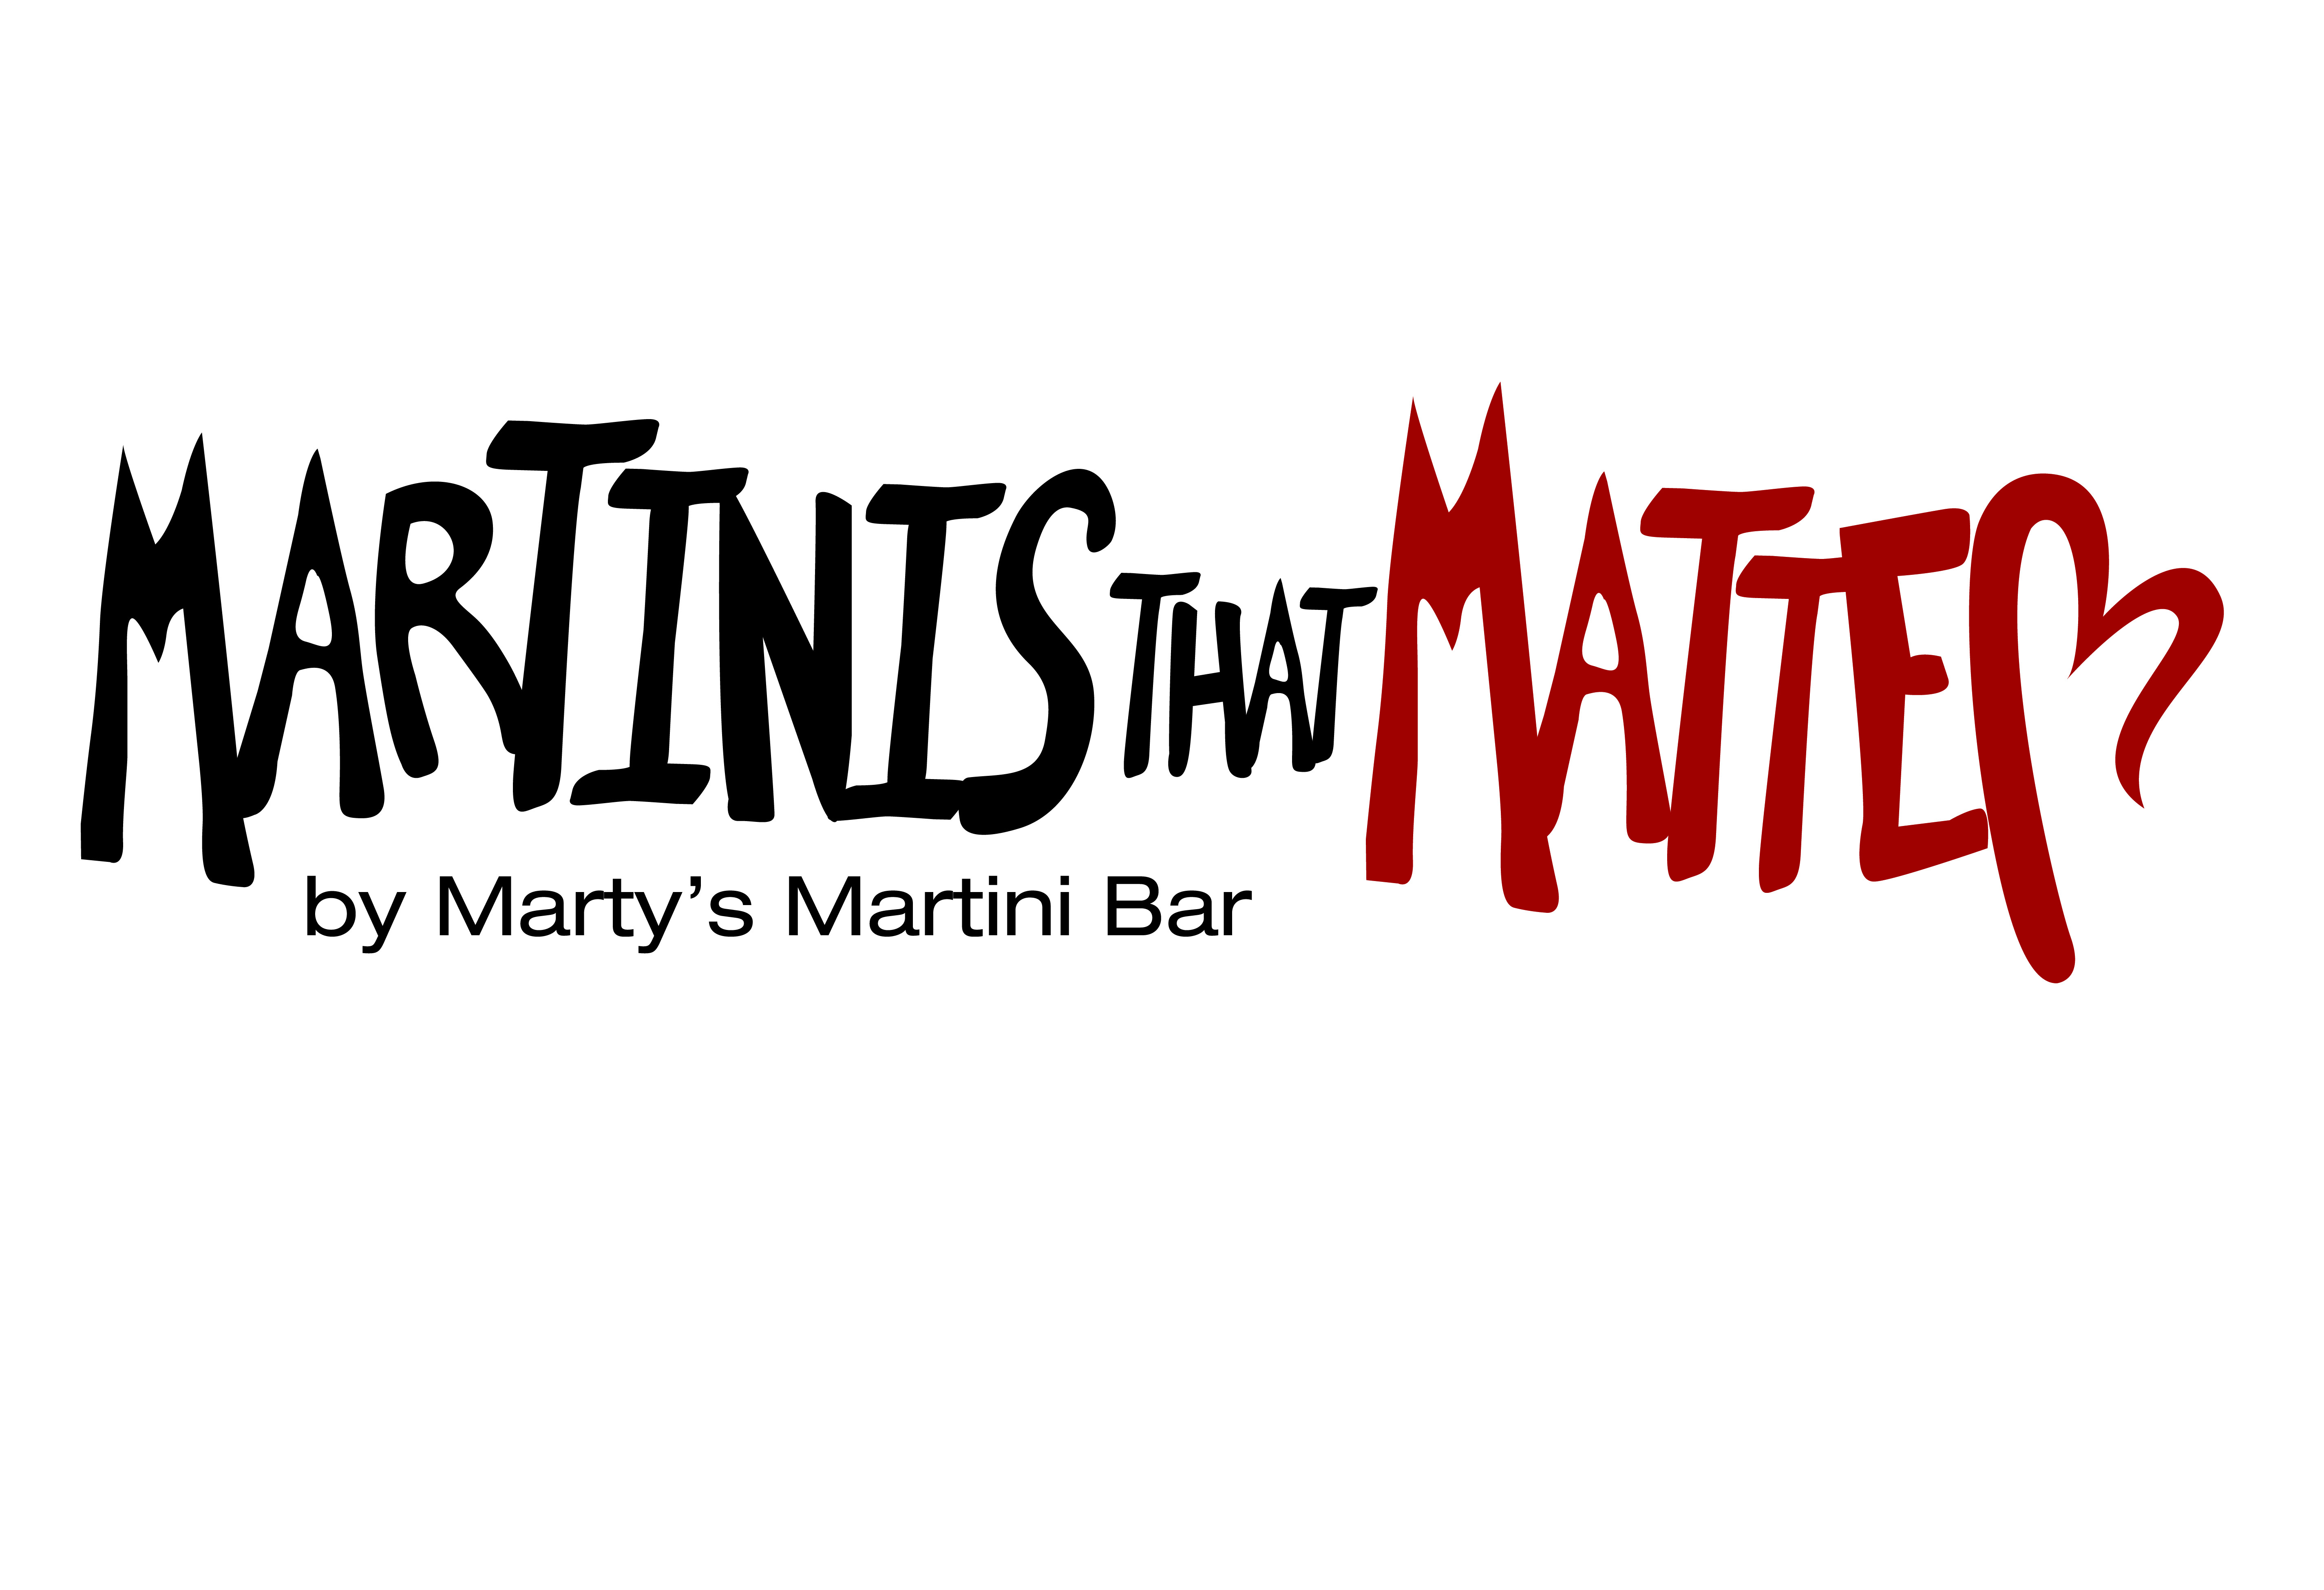 Join us for a drink at Marty’s Martini Bar (1511 W Balmoral Ave) on Sunday, January 7, from 2-5 p.m. for a Martinis that Matter fundraiser. Profits will benefit programs and services of The Boulevard.